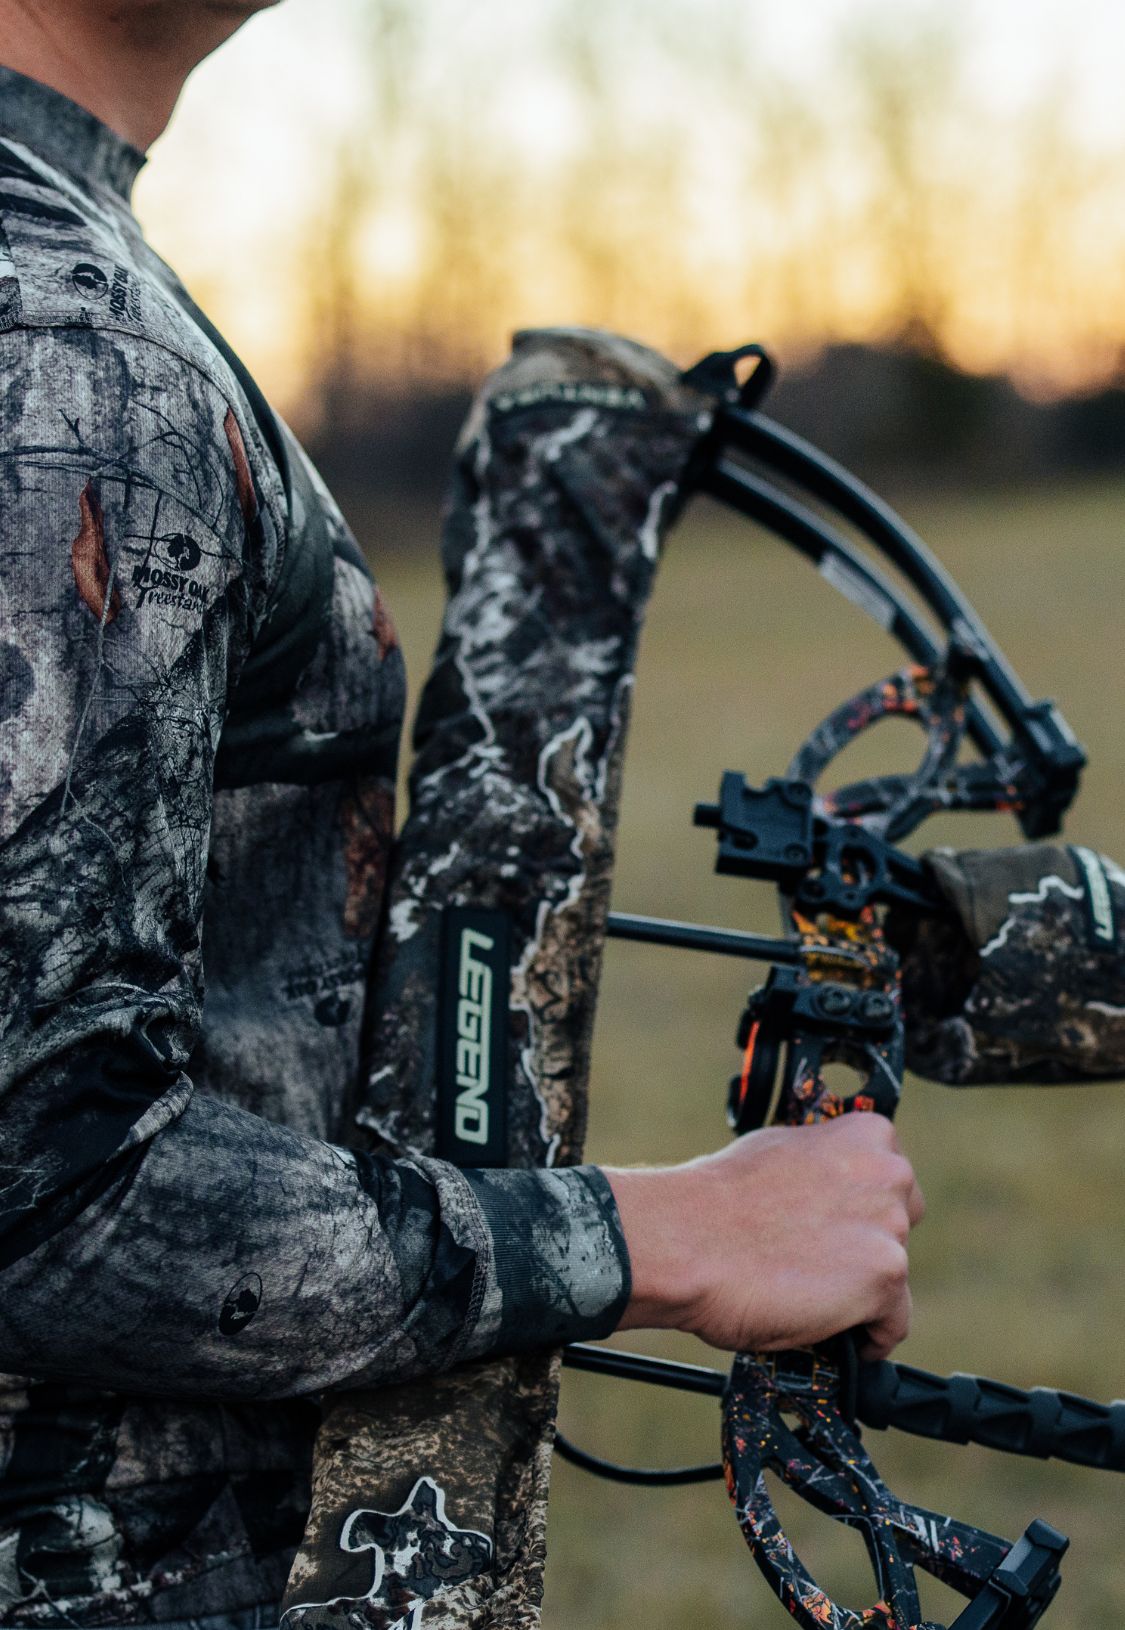 Find Your Aim: The Best Archery Gear for Hunting and Target Shooting